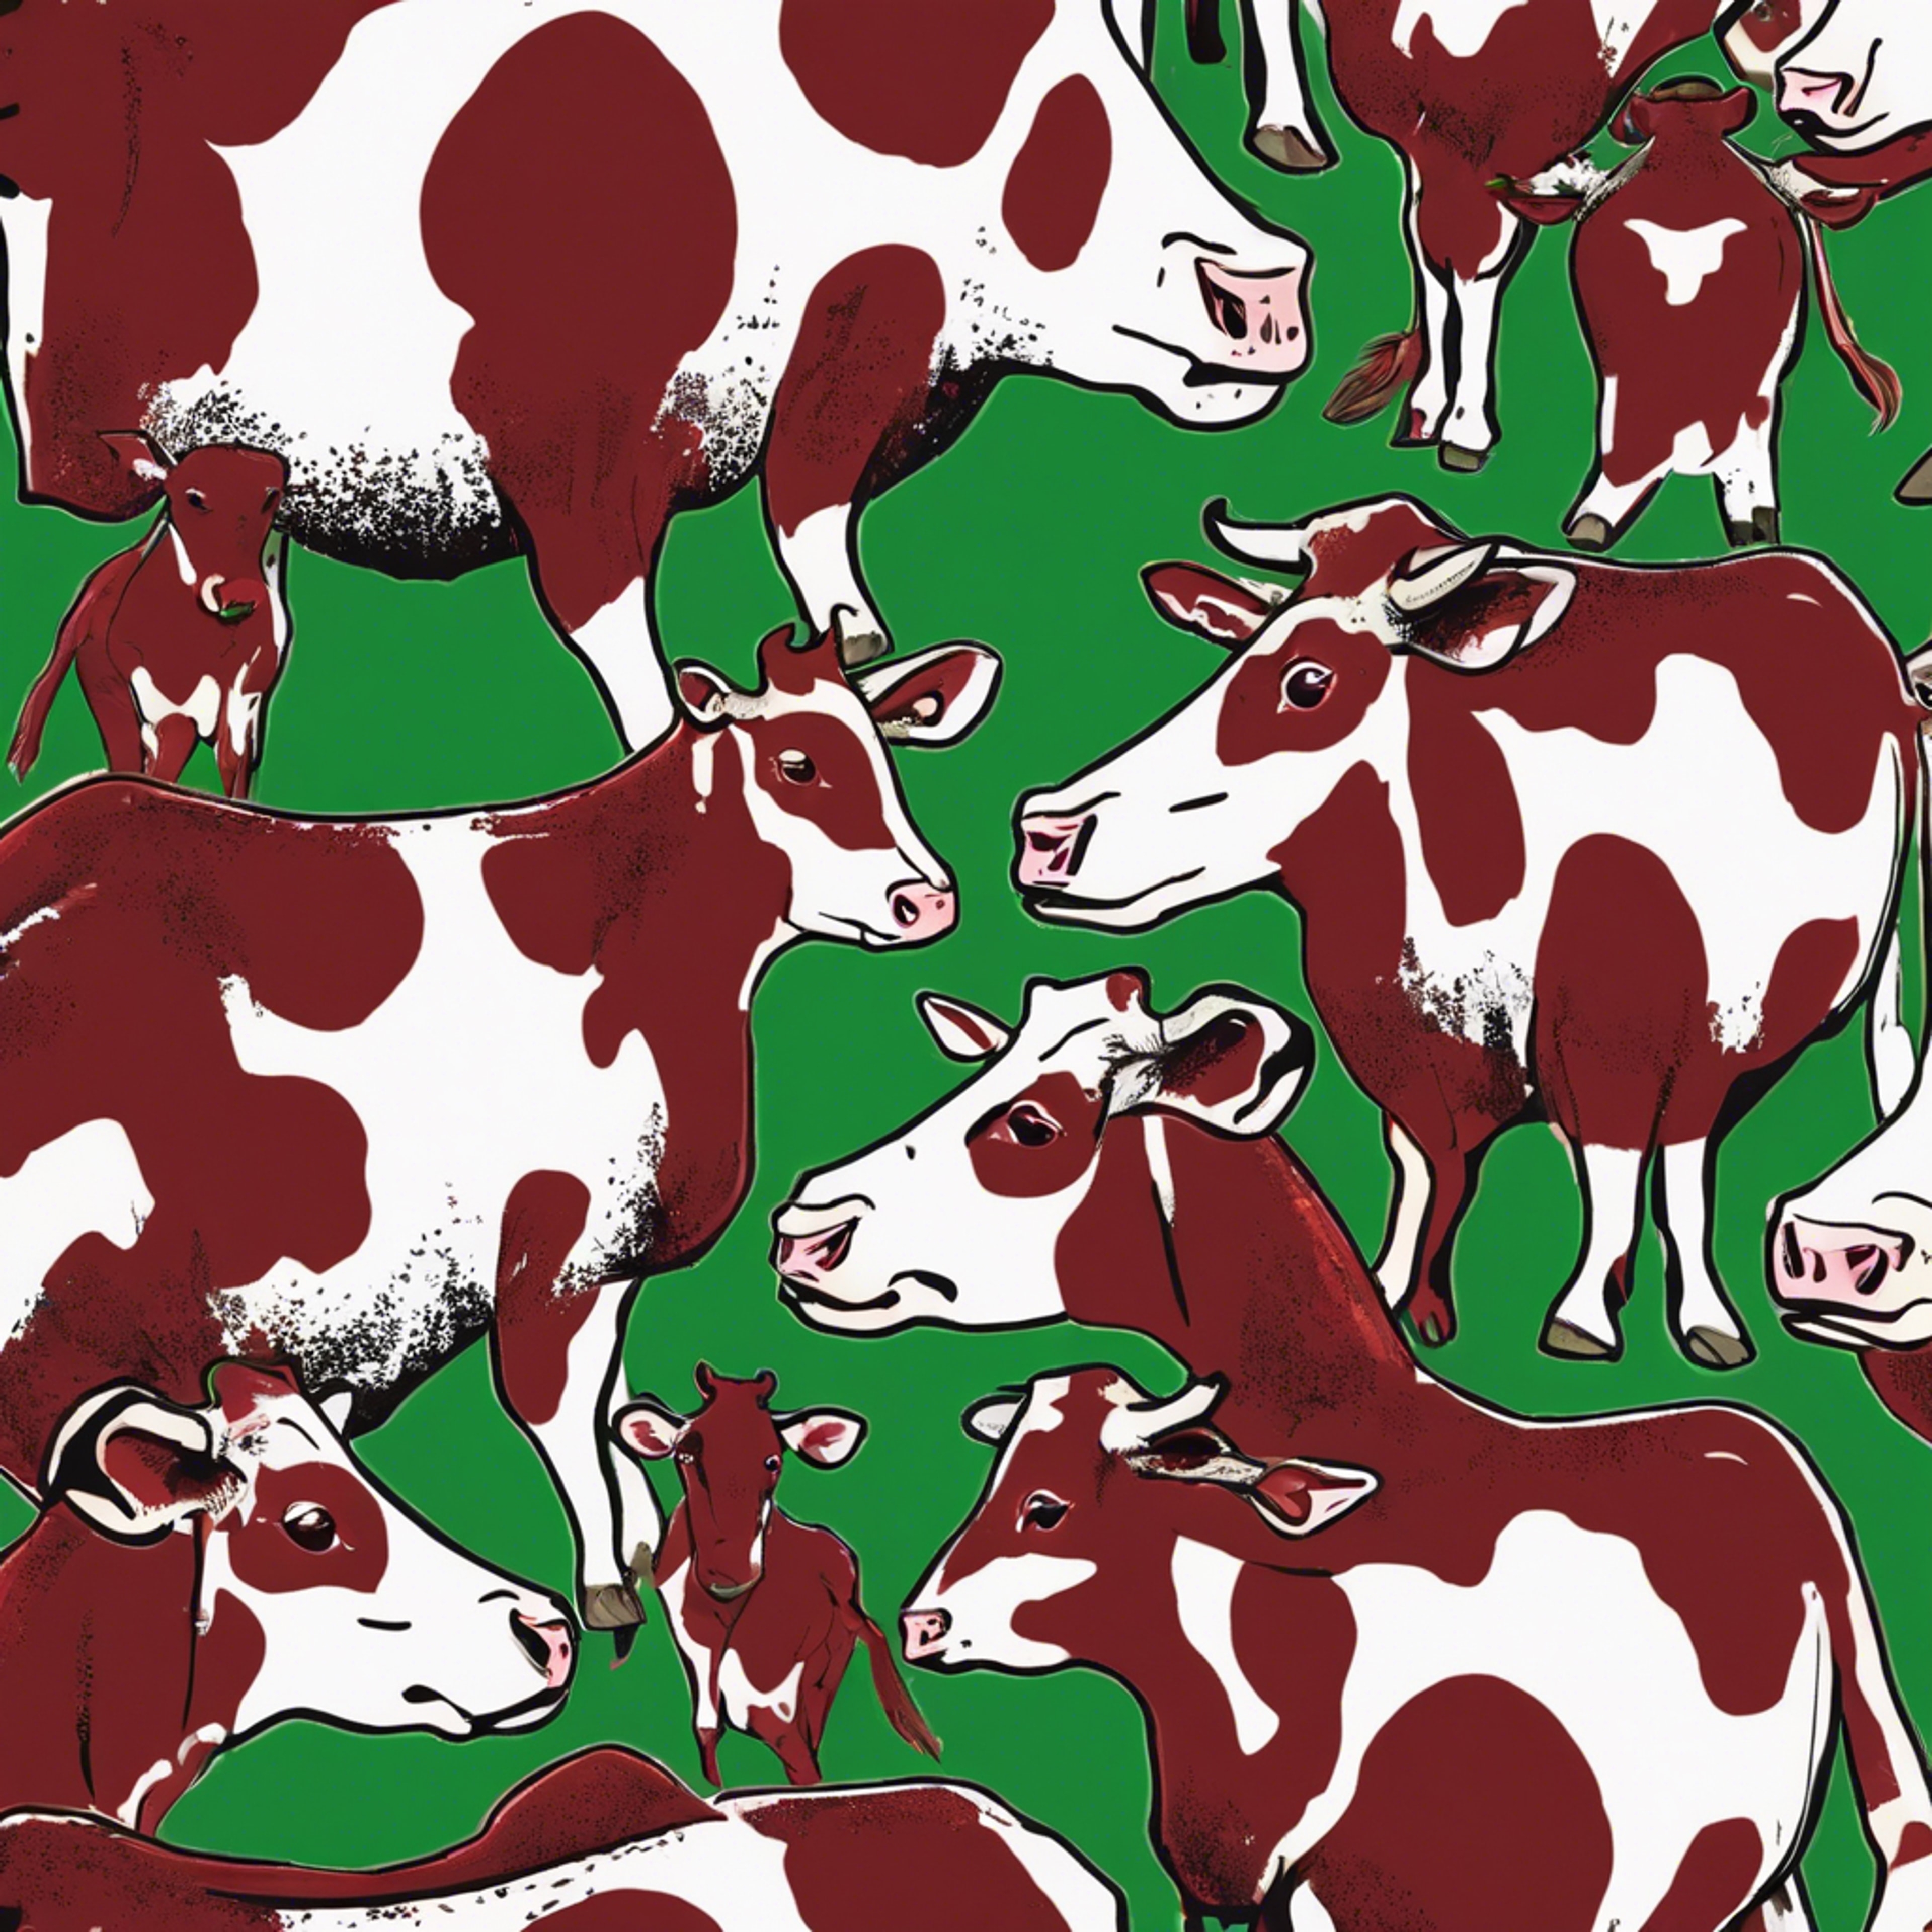 Cow spots in a mixed arrangement of rich red and fresh green. Wallpaper[f1cd1f055c9d420f9ac5]